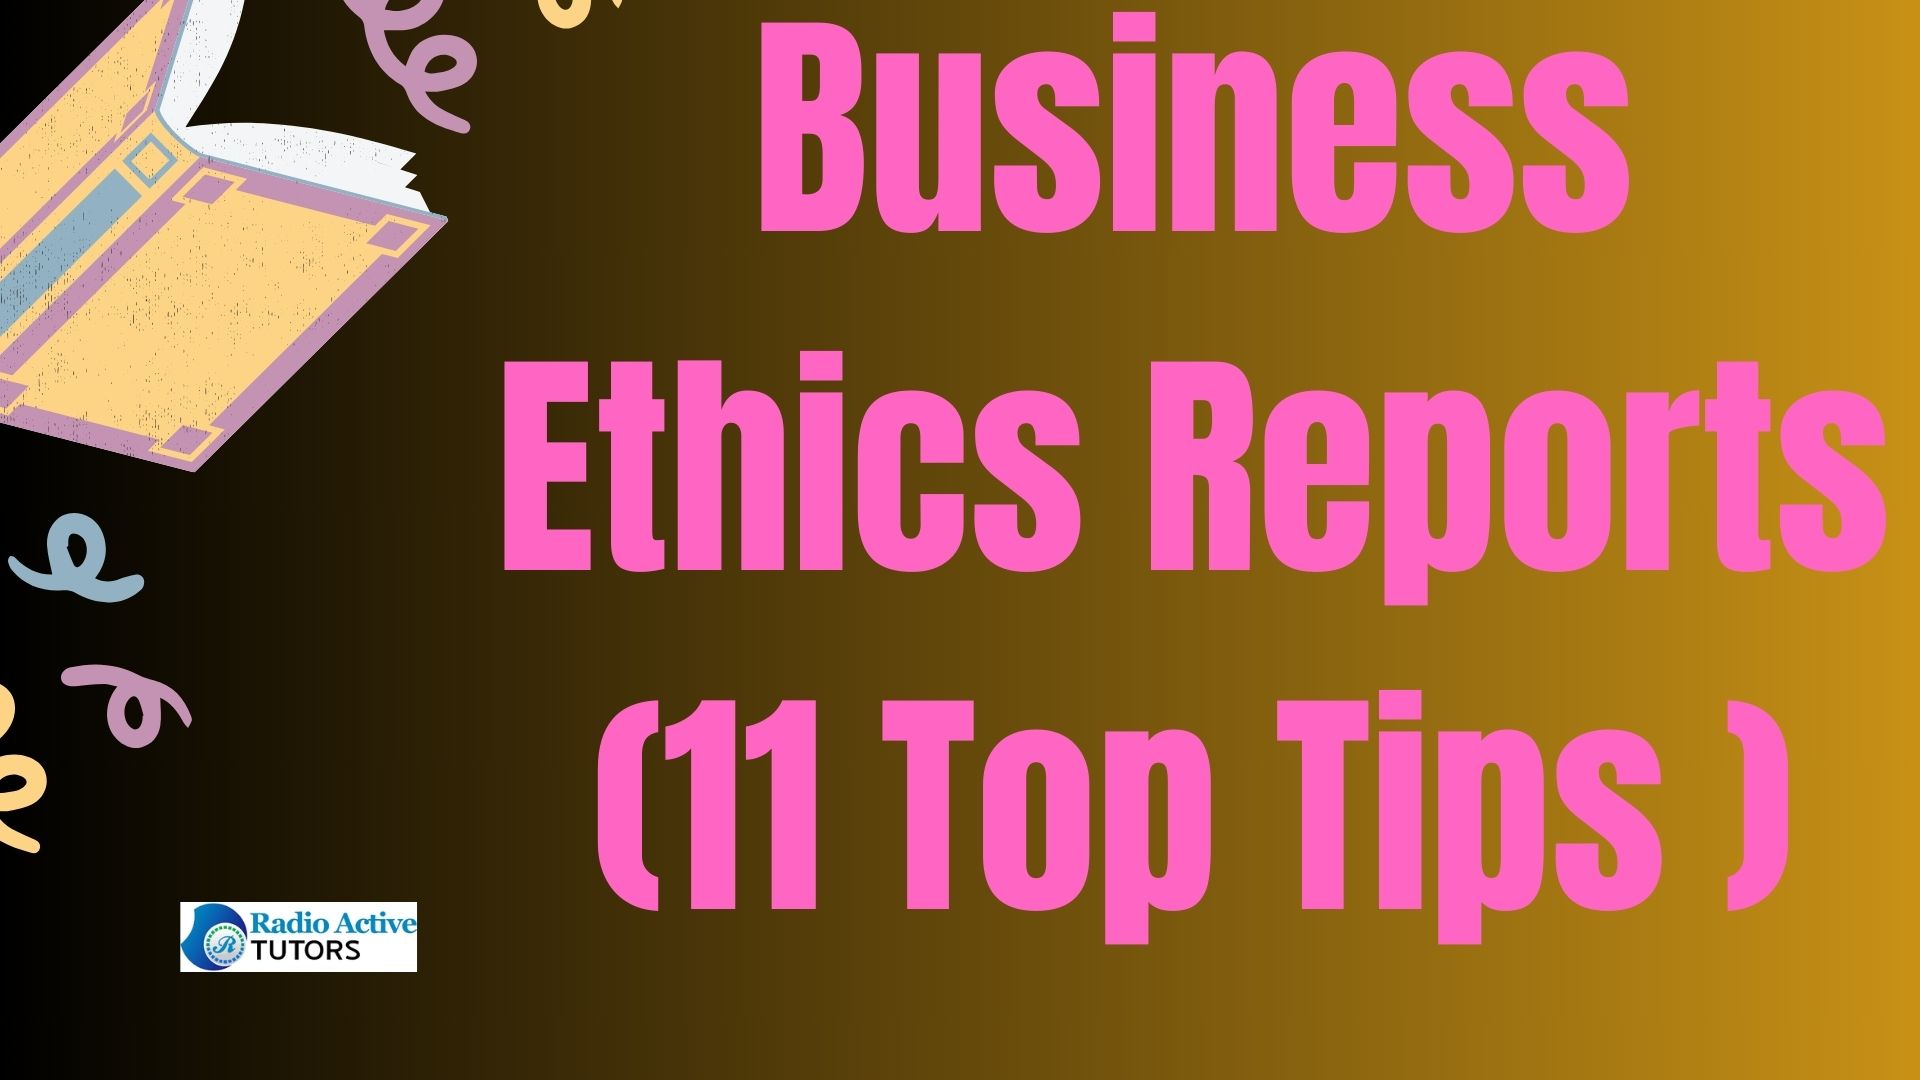 Business Ethics Reports (11 Top Tips )